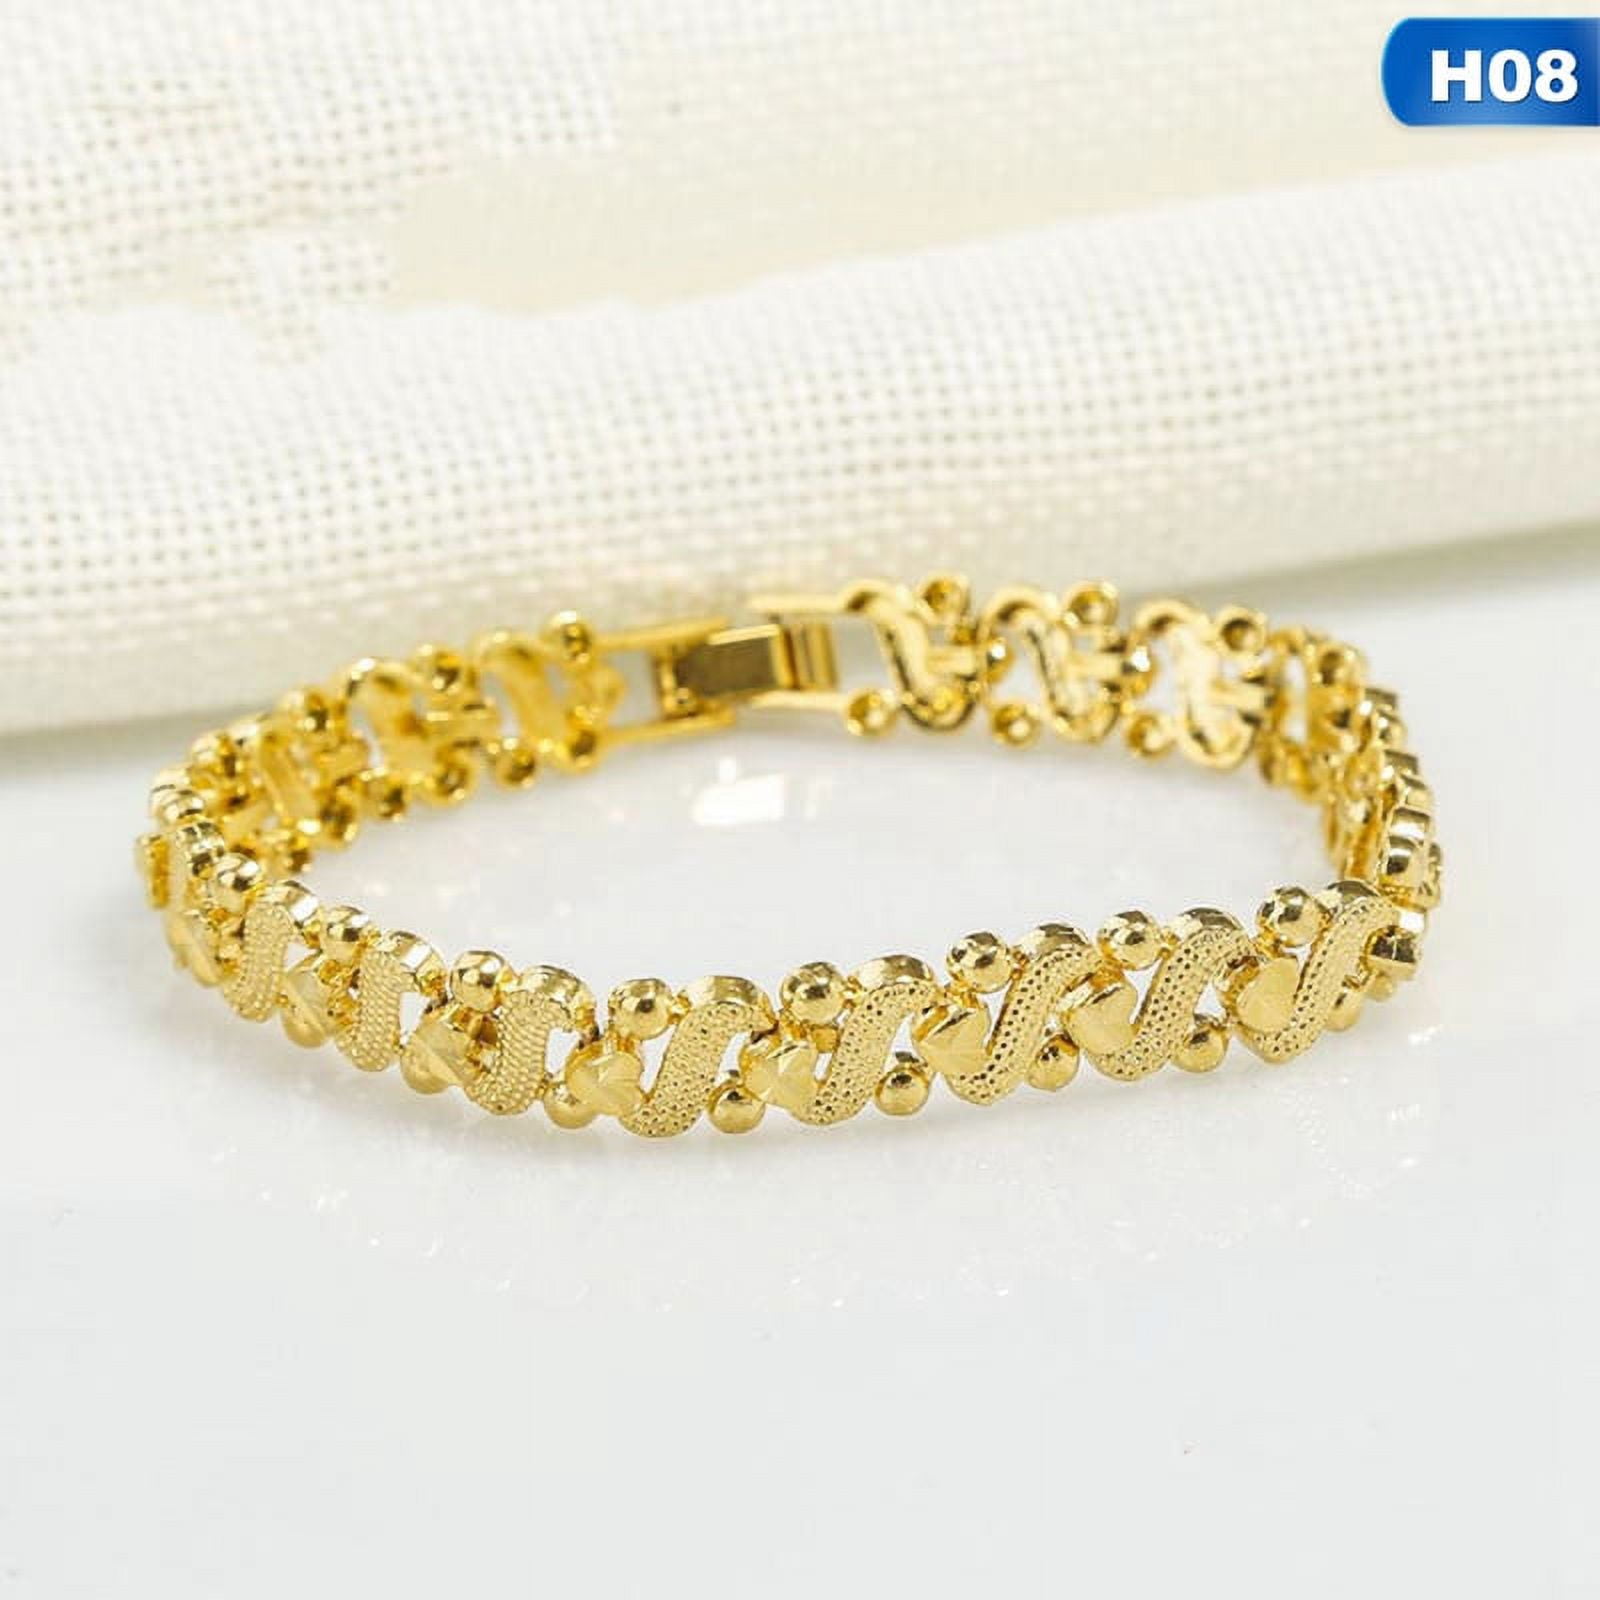 12mm Miami Curb Cuban Link Chain Bracelet for Men 24k Gold Plated |  Lifetime Jewelry